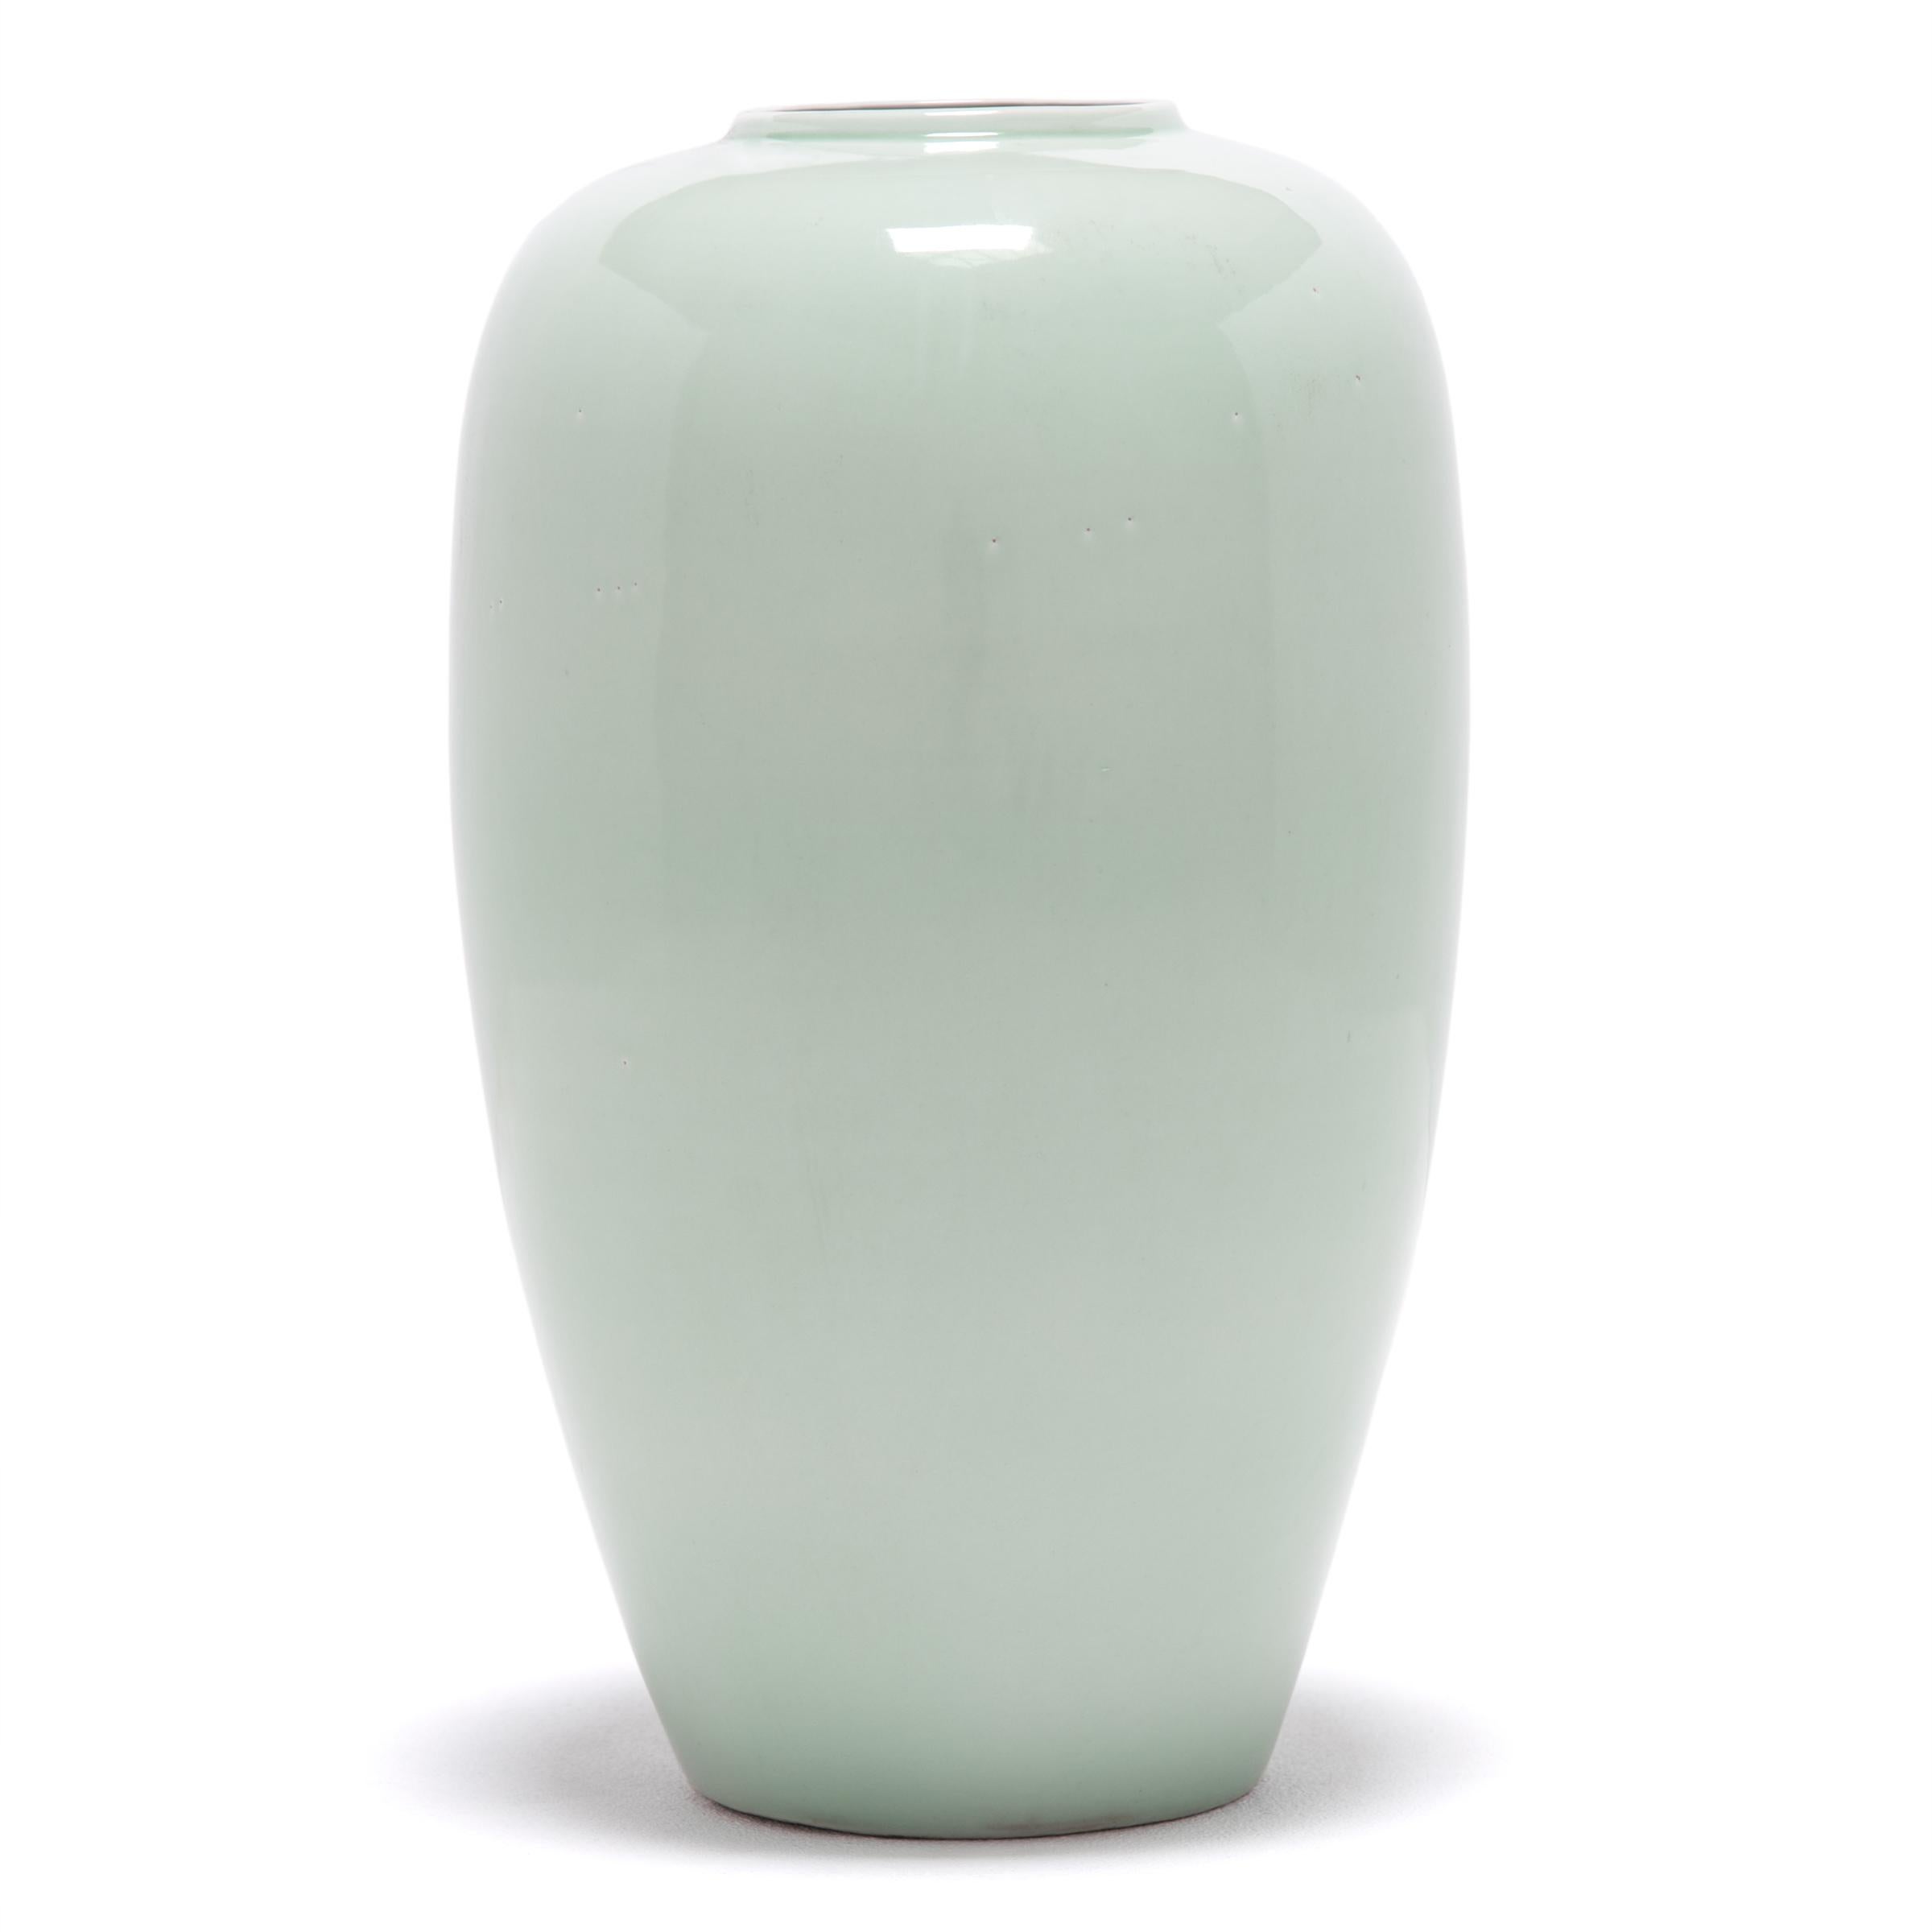 Collectors have coveted celadon ceramics, like this vase with gentle proportions, for centuries. The glazing process is complex: an artisan covered the vase in liquid iron-rich clay, and then with a glaze that reacts to the iron to create this